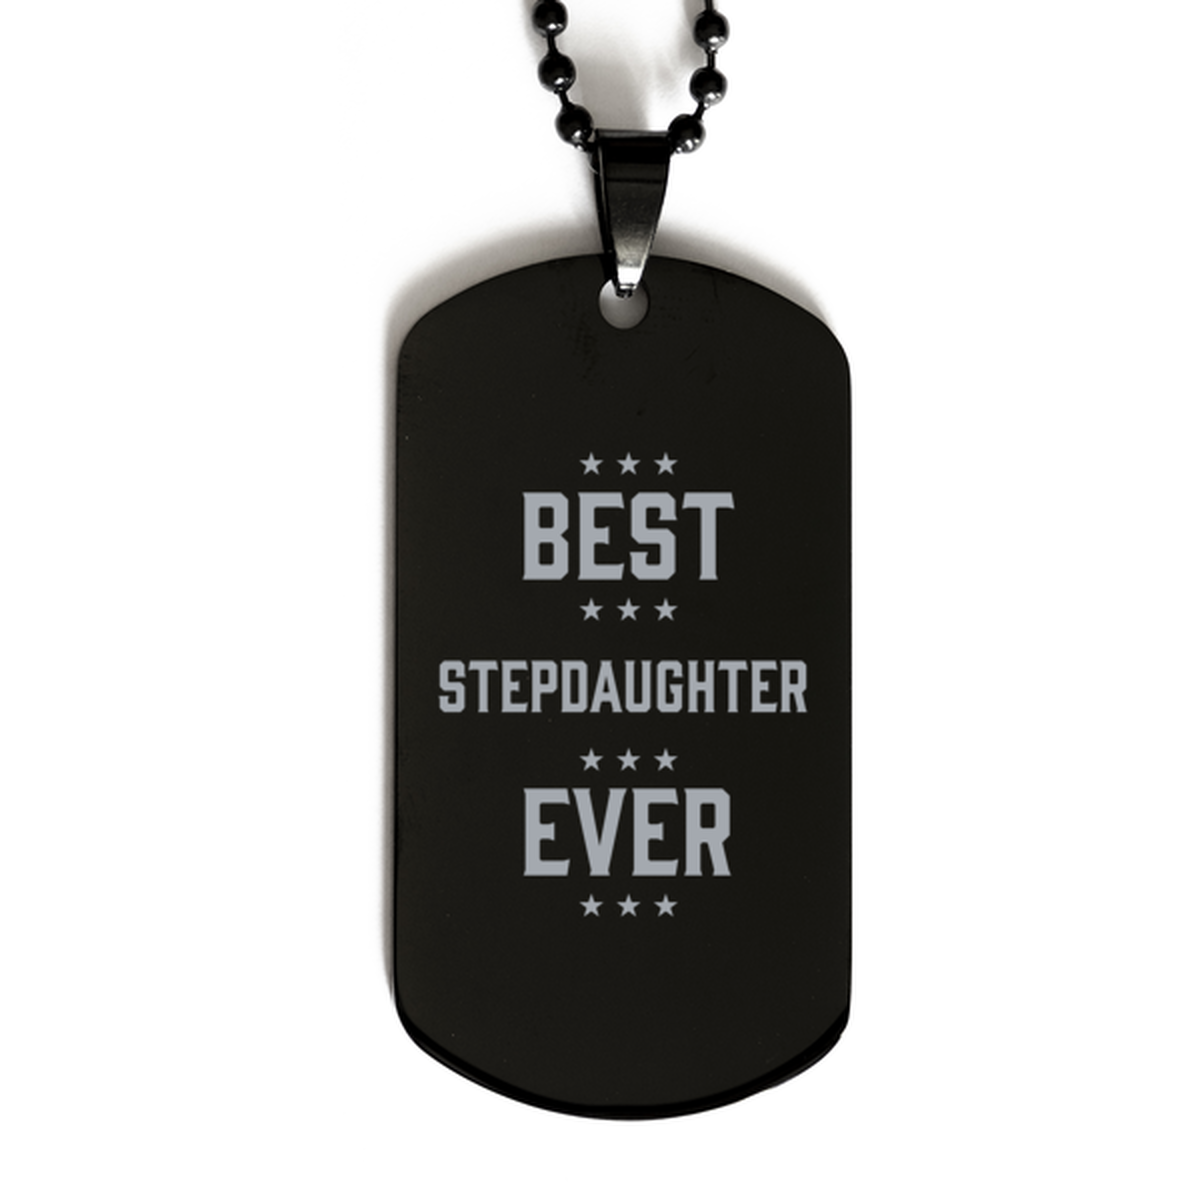 Best Stepdaughter Ever Stepdaughter Gifts, Funny Black Dog Tag For Stepdaughter, Birthday Family Presents Engraved Necklace For Women